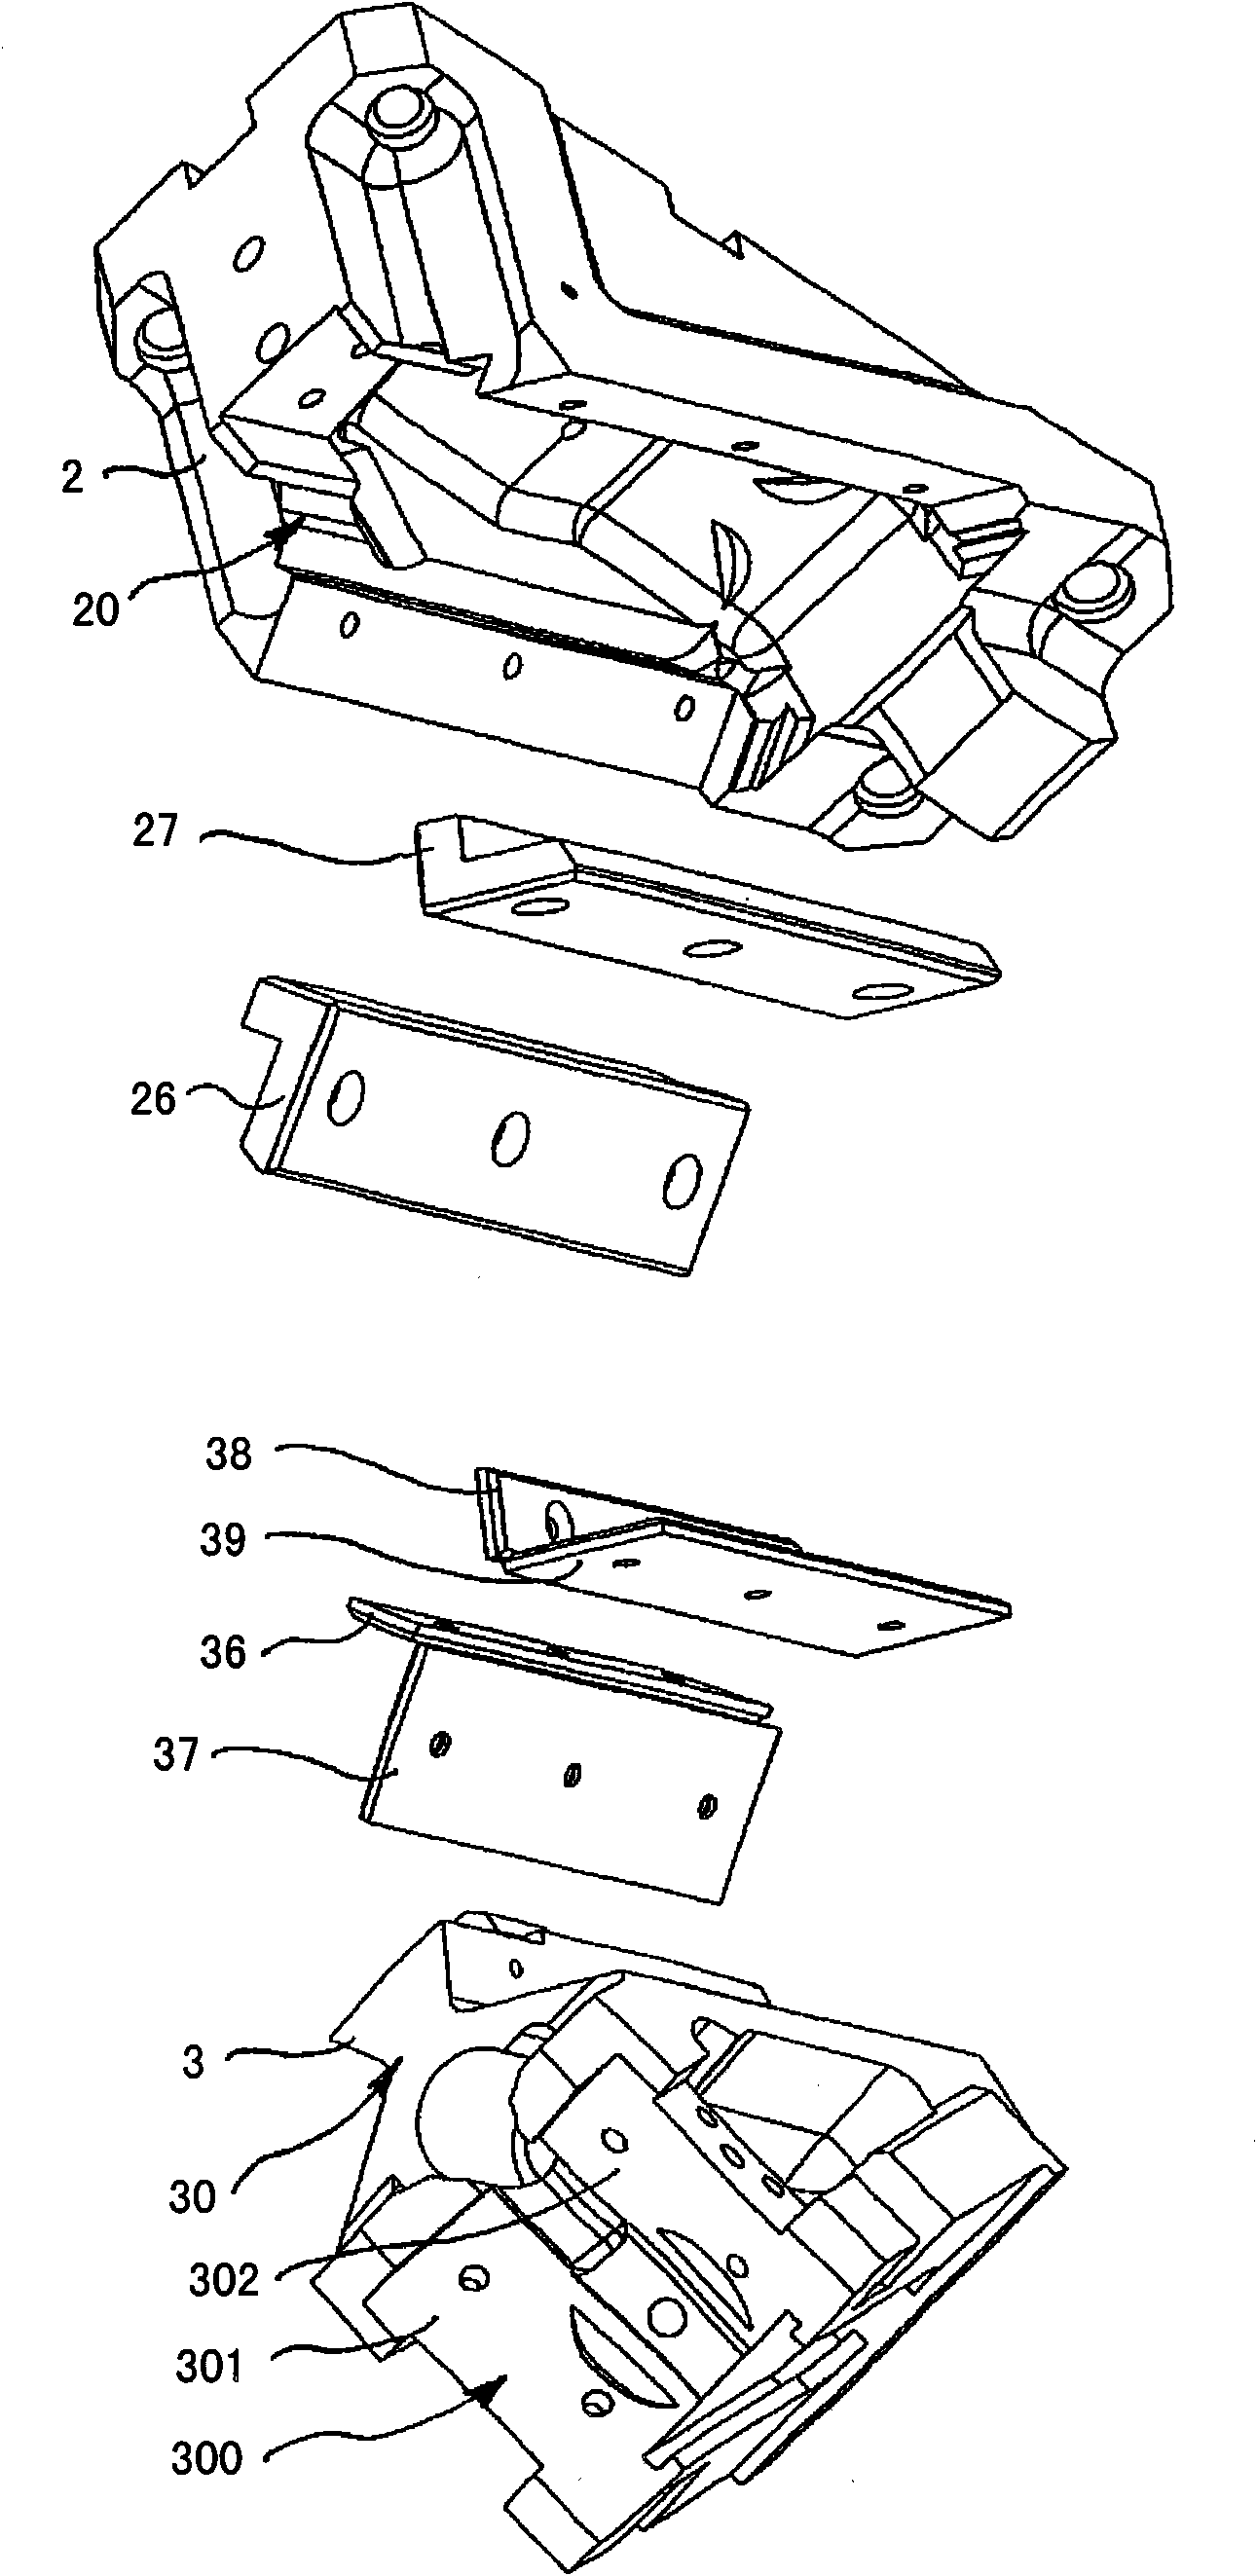 Wedge drive with slide receptacle